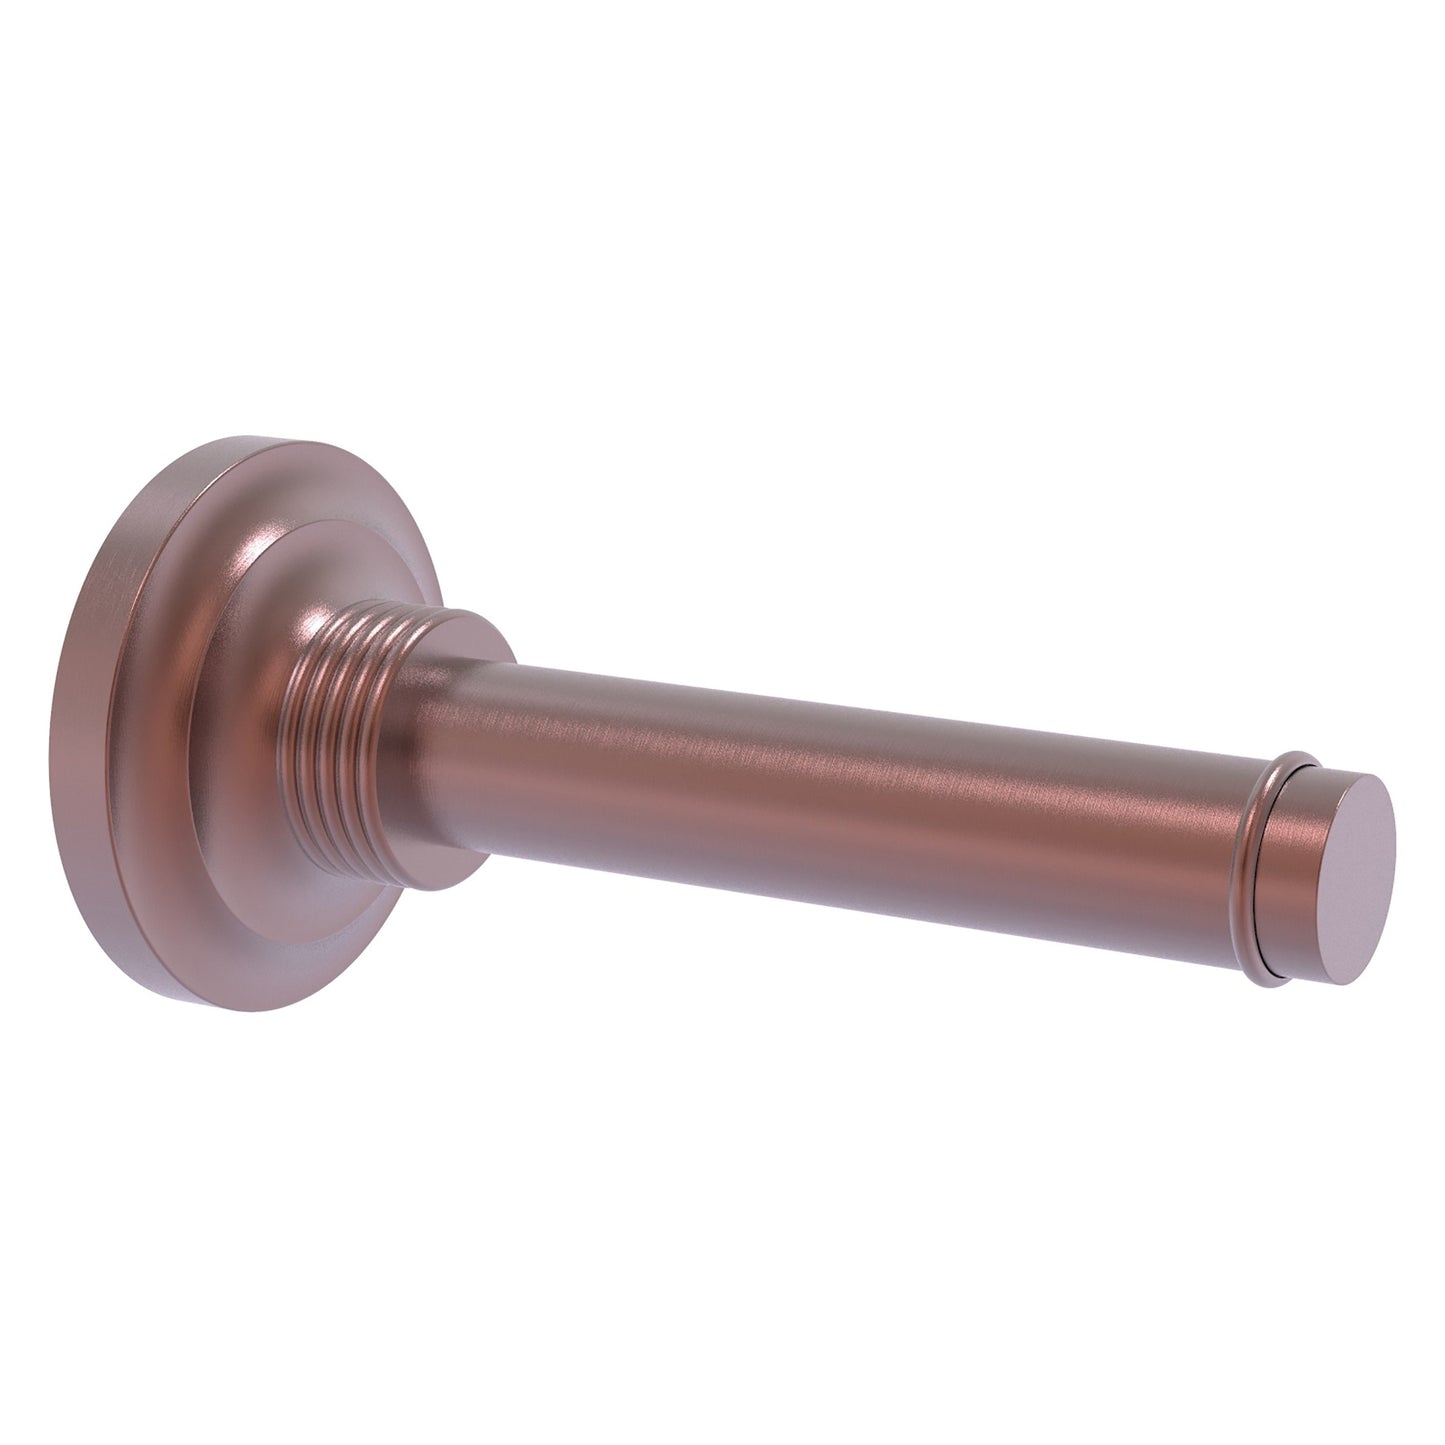 Allied Brass Que New 6.4" x 3" Antique Copper Solid Brass Horizontal Reserve Roll Toilet Paper Holder